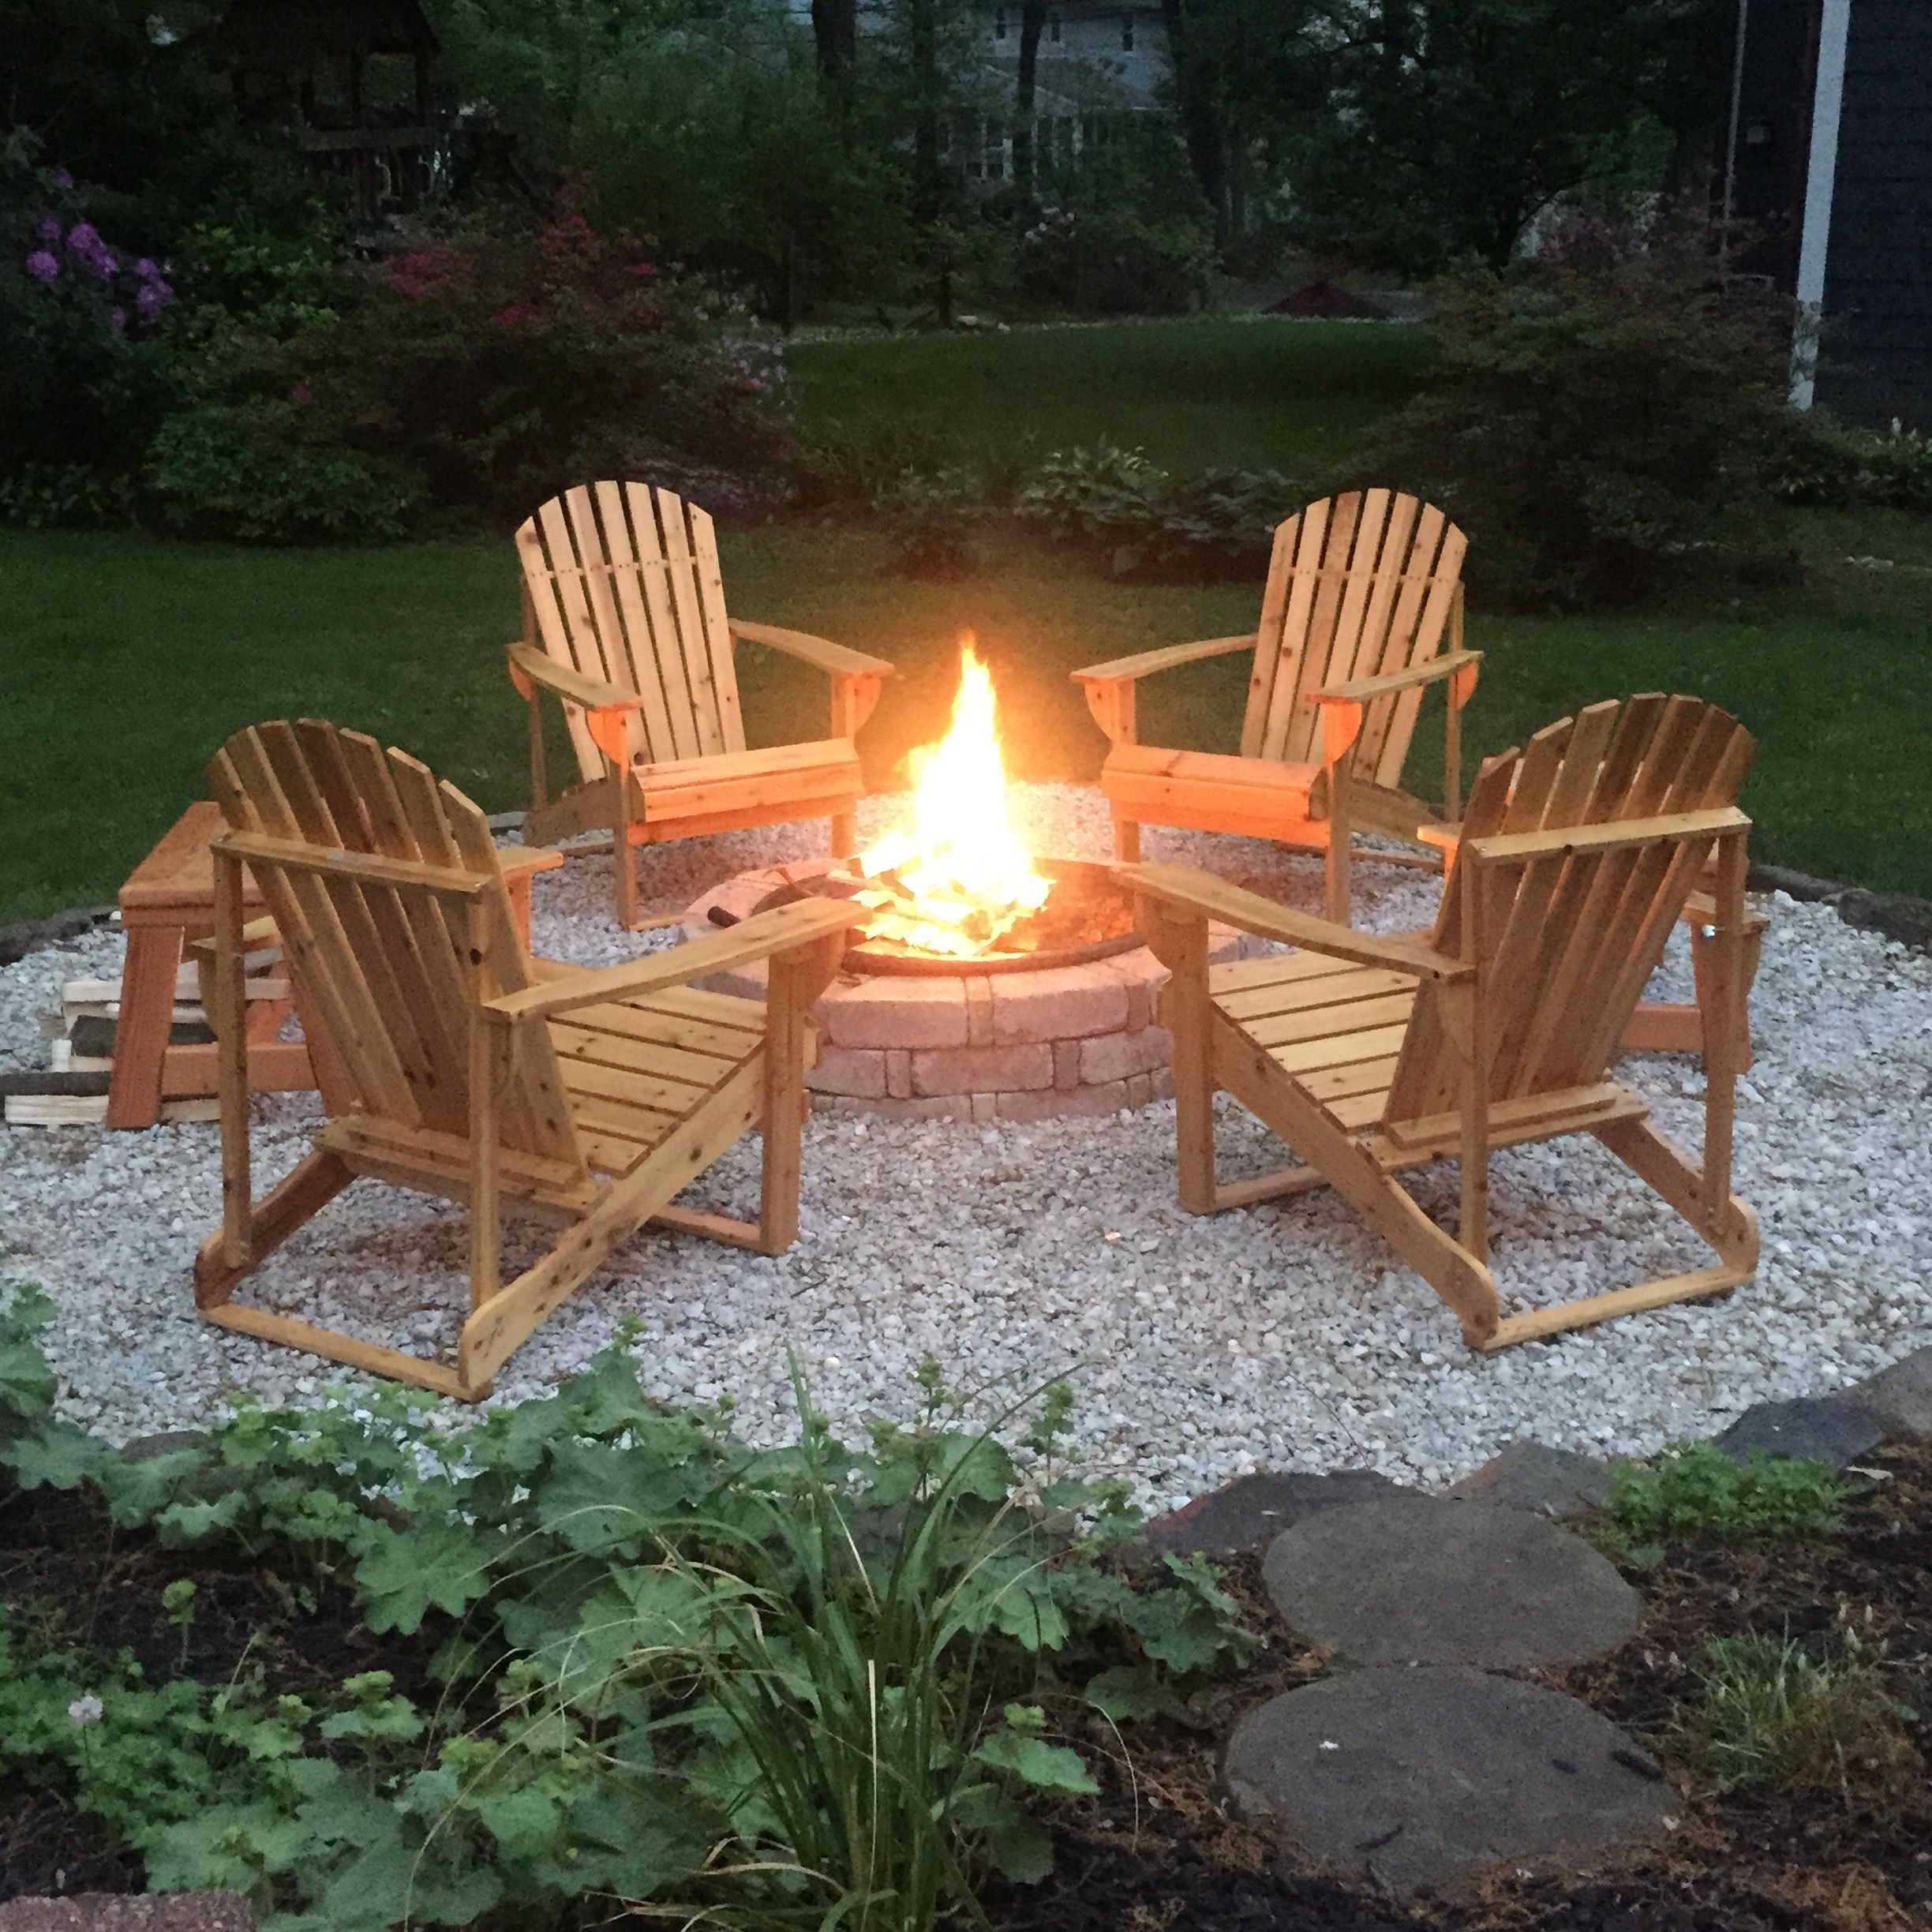 DIY backyard fire pit complete with adirondack chairs and handmade ...